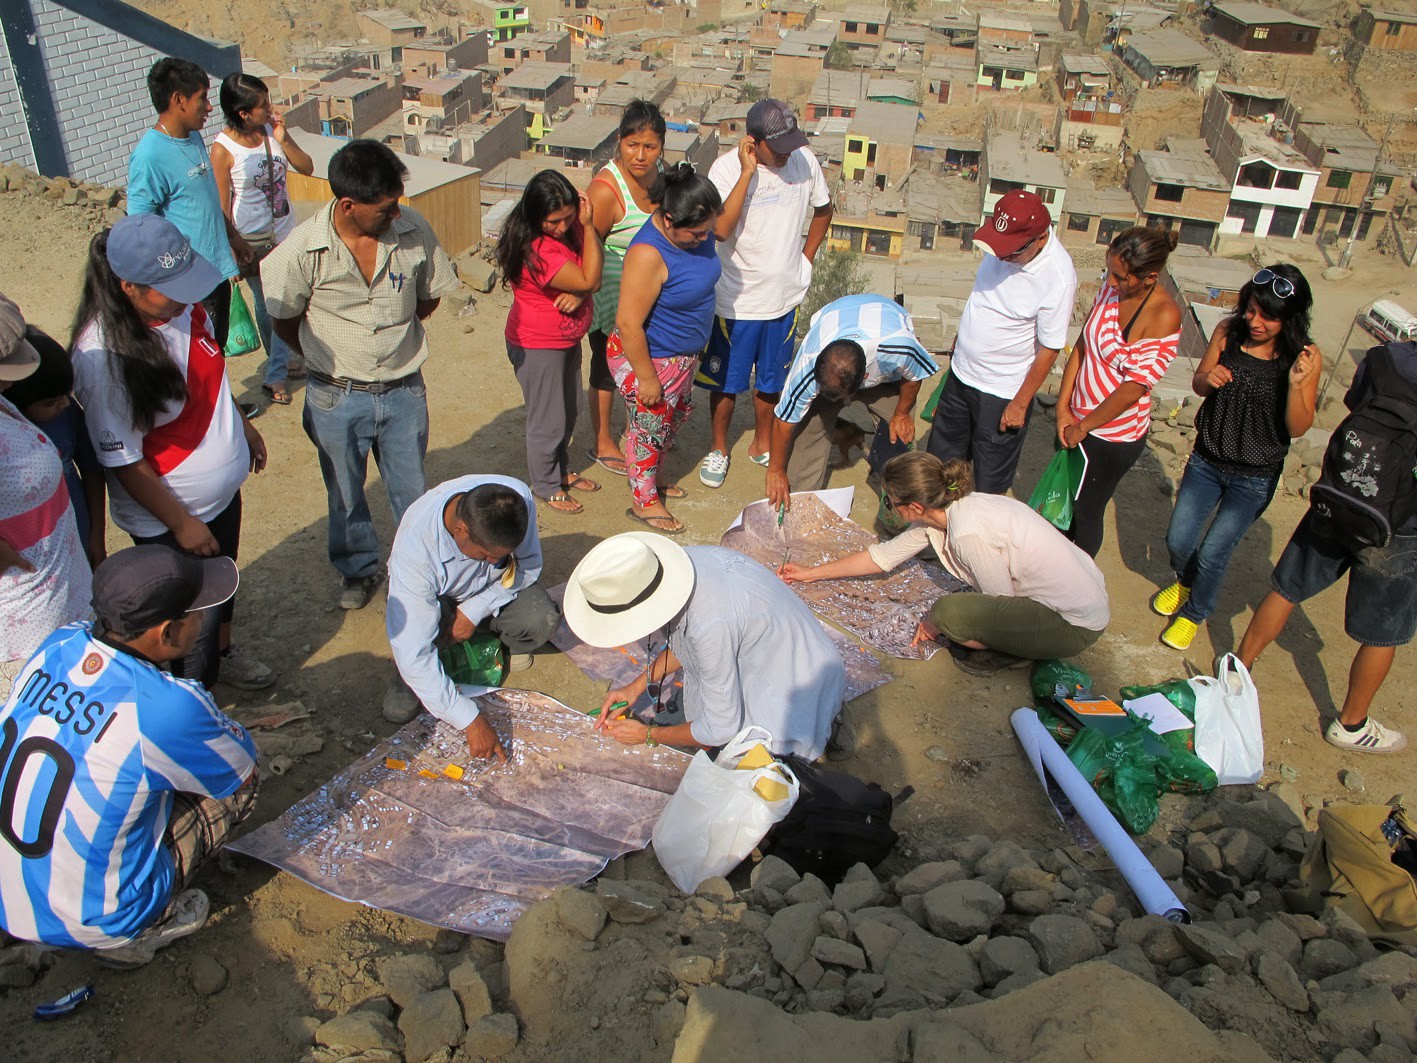 A group of people standing on a hillside surround some maps on the ground, which are being pointed at and examined. In the background, the favela can be seen rolling down the hillside.